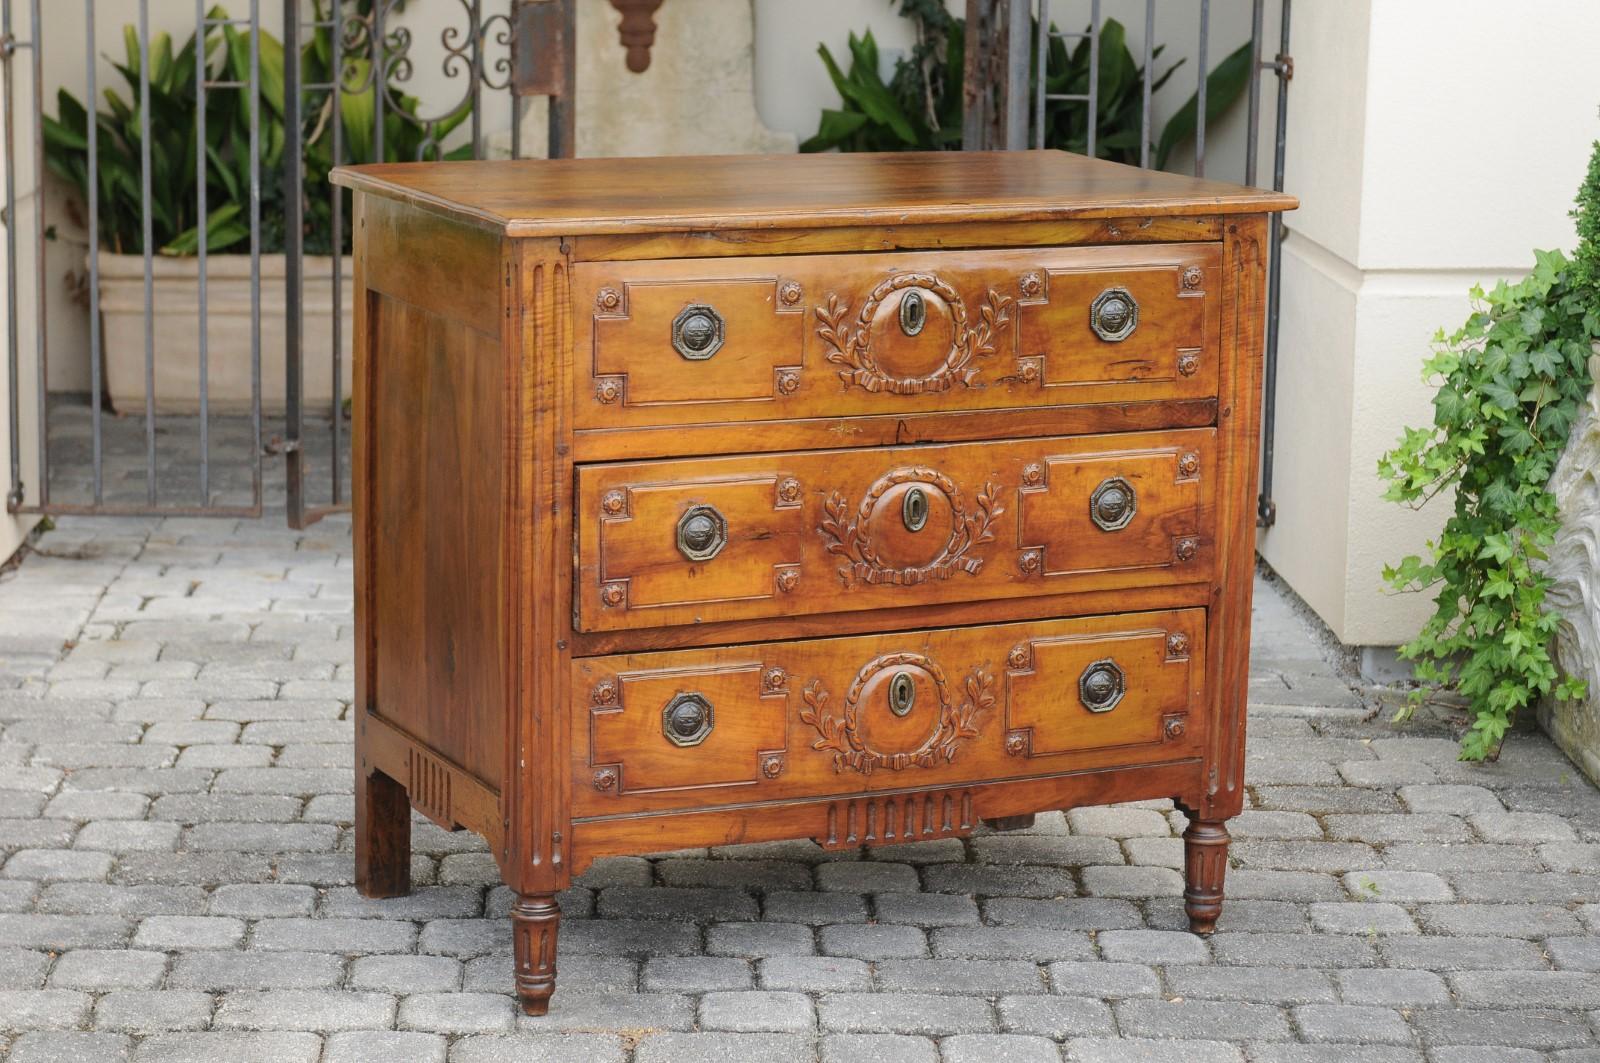 A French Restauration period walnut commode from the early 19th century, with three drawers, carved foliage and fluted accents. Born in France during the early years of the 19th century, this exquisite commode features a rectangular planked top